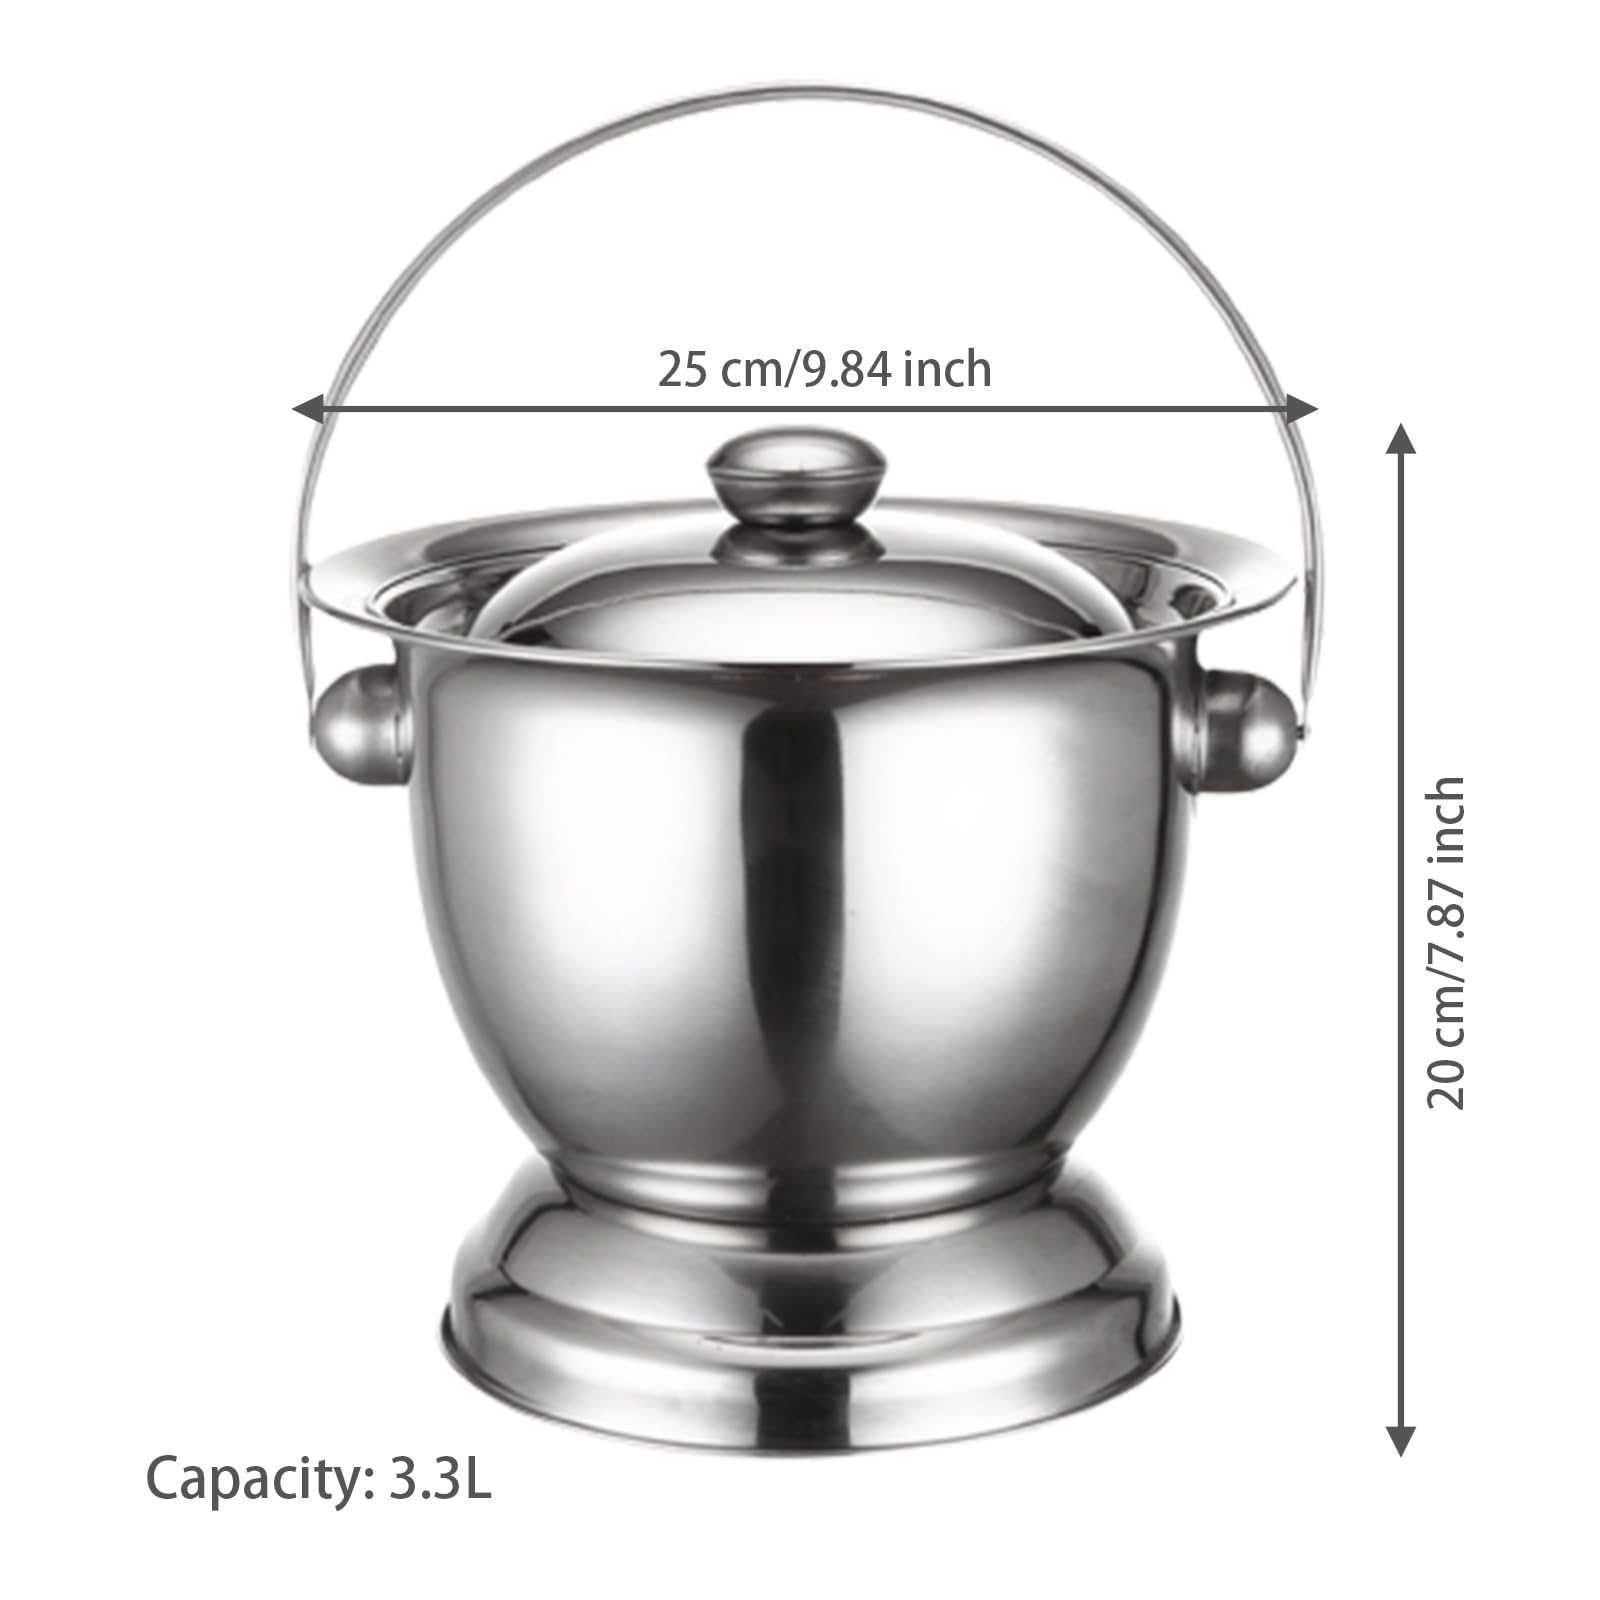 Hajimia Chamber Urinary with Cover 3.3L Stainless Steel BALMON SPITON Metal Cube Bedpan Urine for Elderly Adult Children